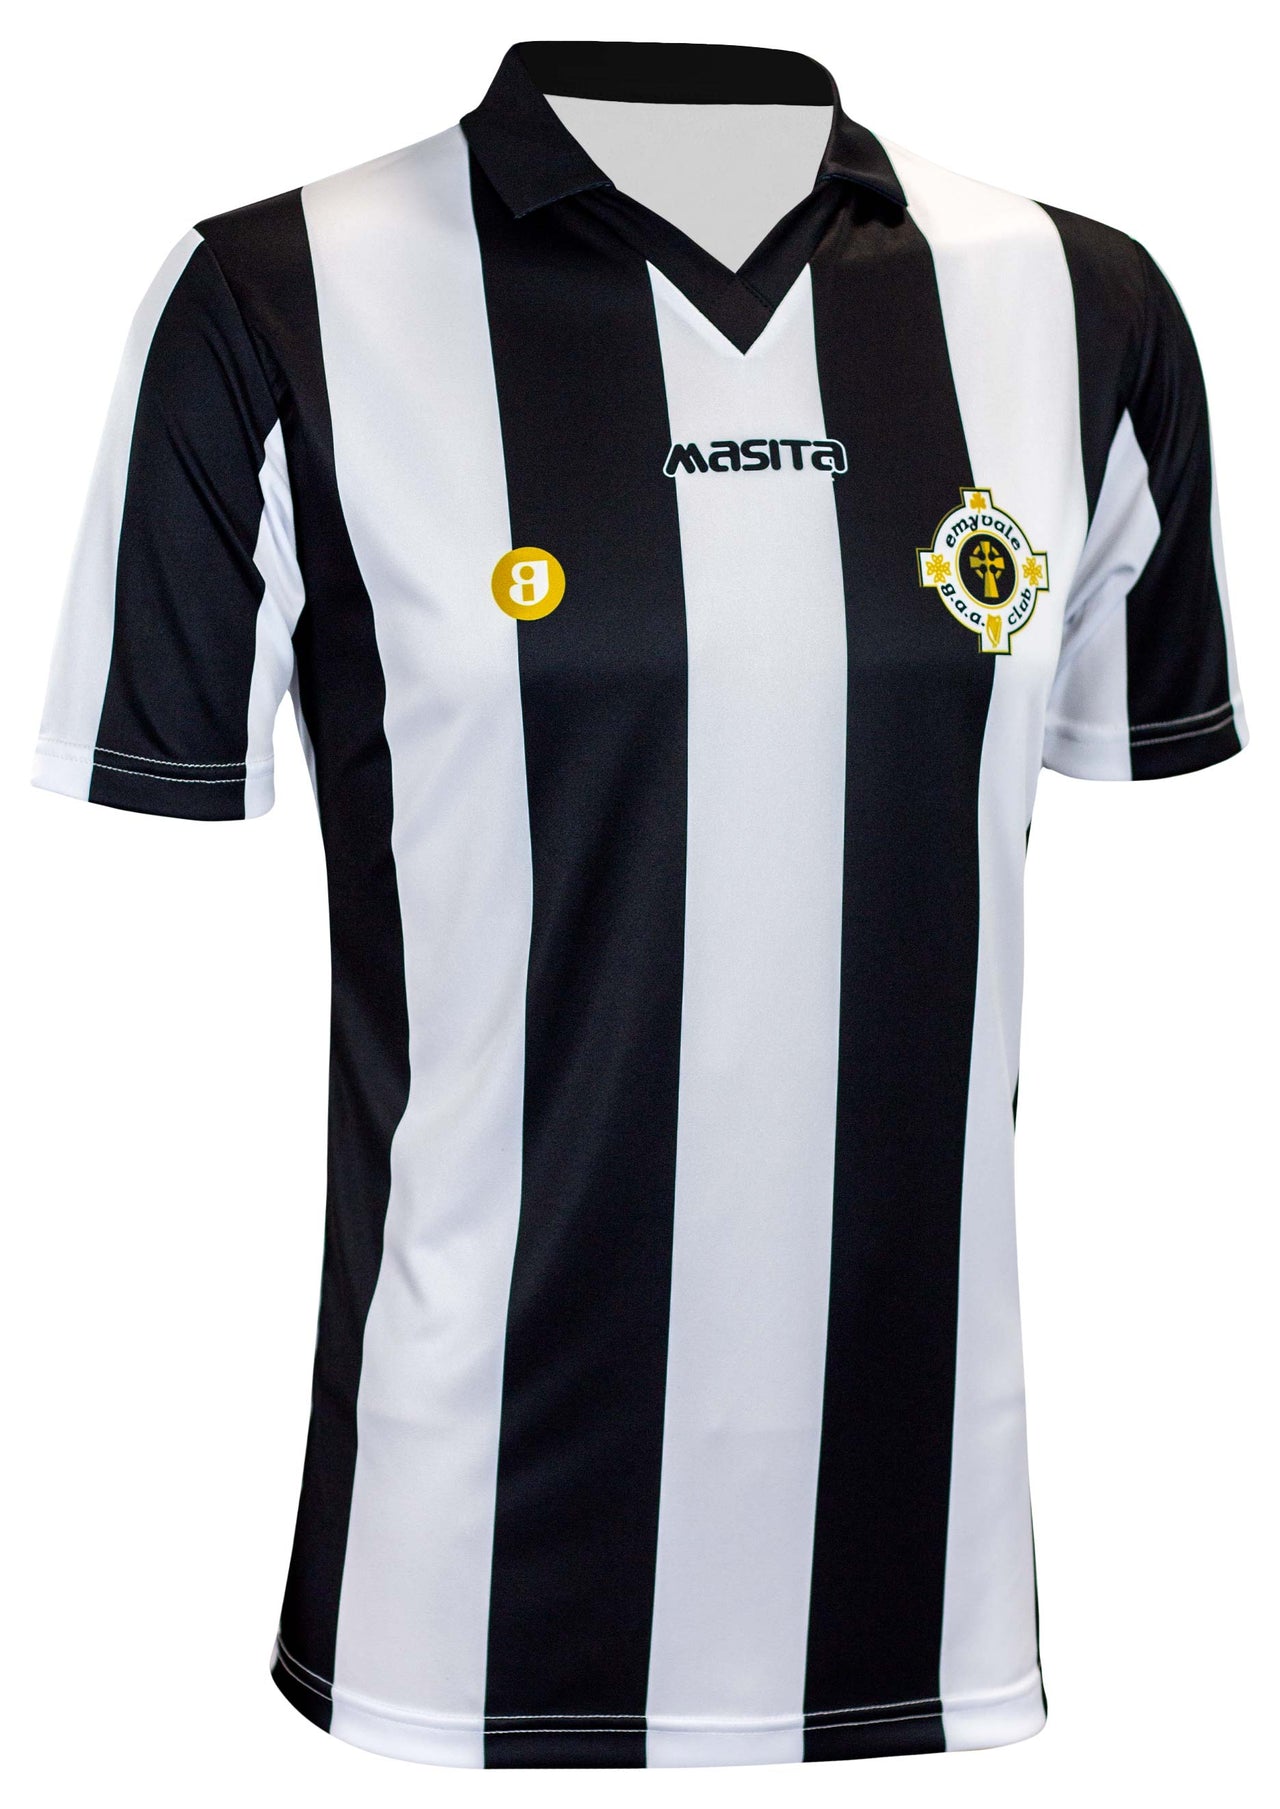 Emyvale GAA Retro Hooped Jersey Player Fit Adult